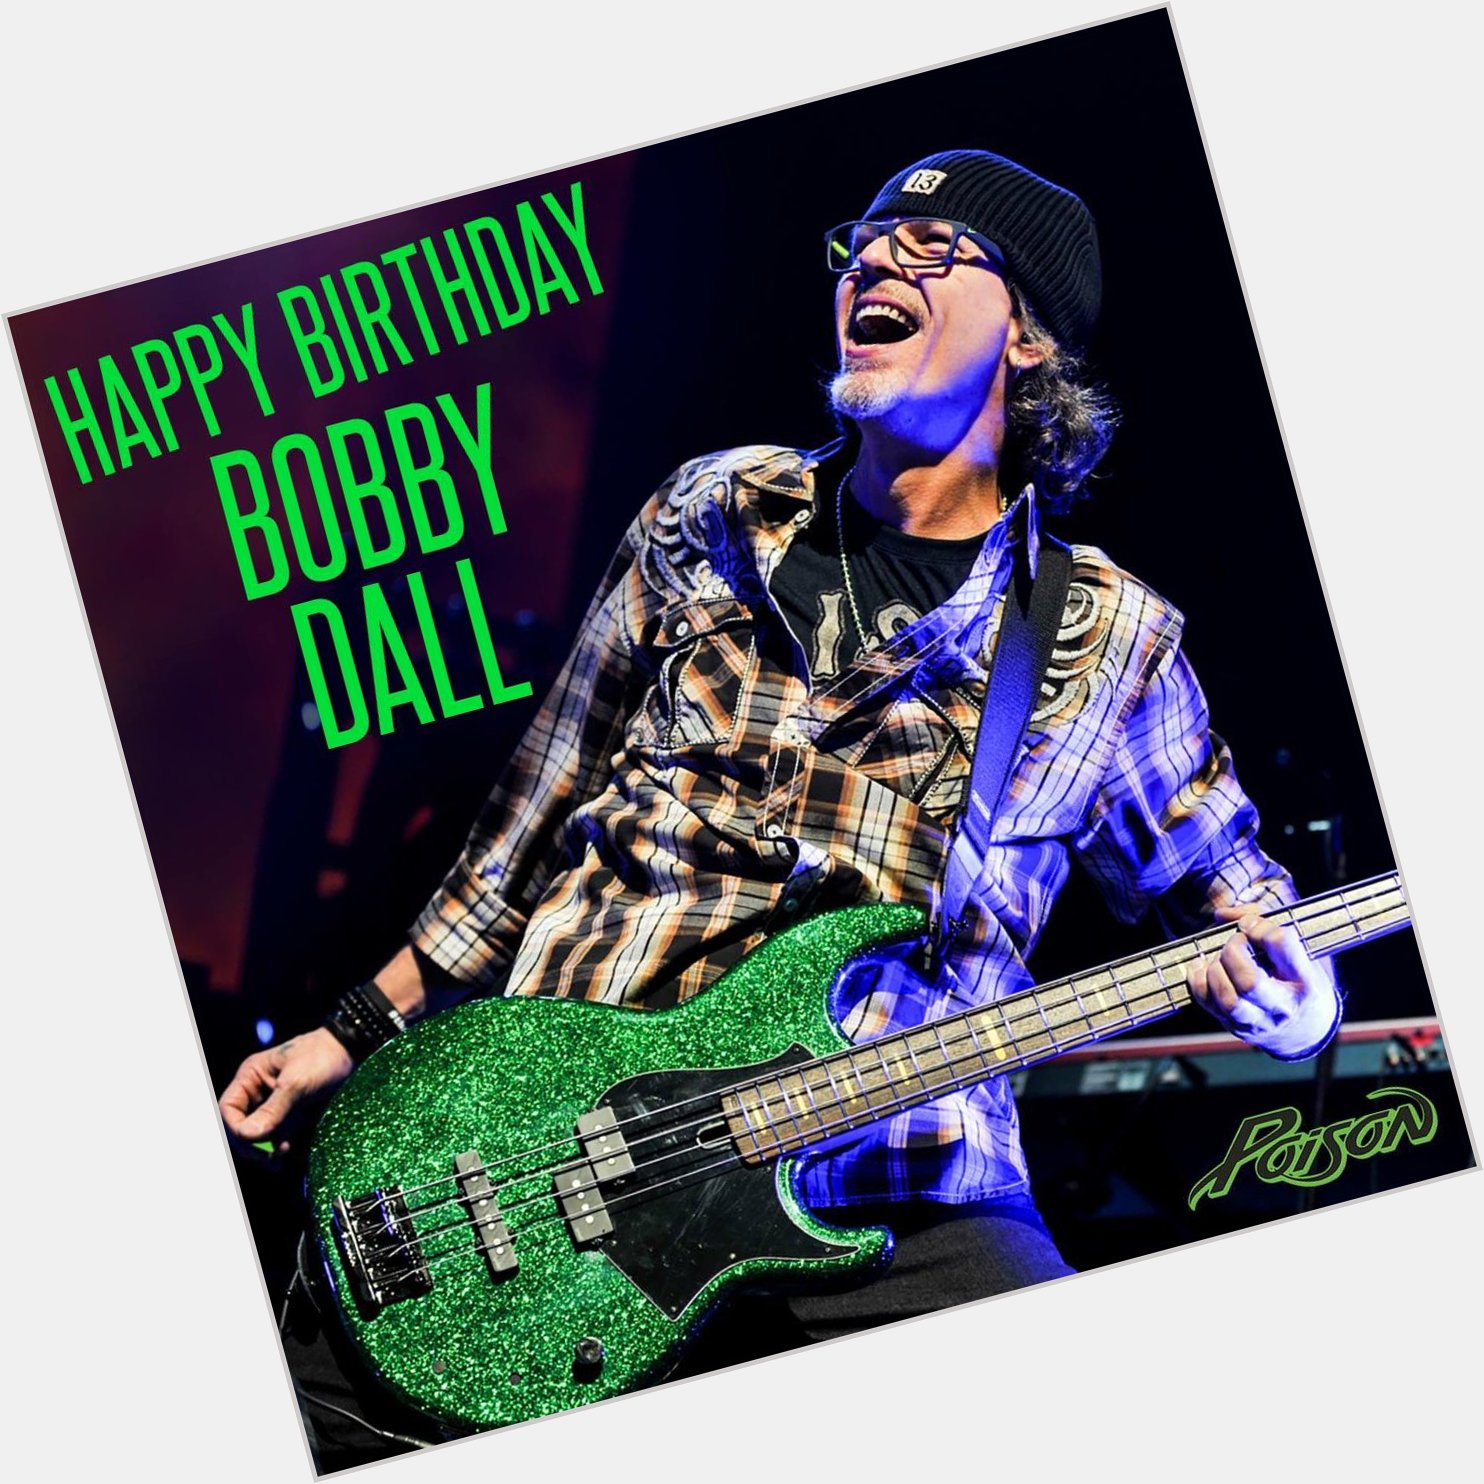 Join us in wishing a VERY Happy Birthday to Bobby Dall today!  